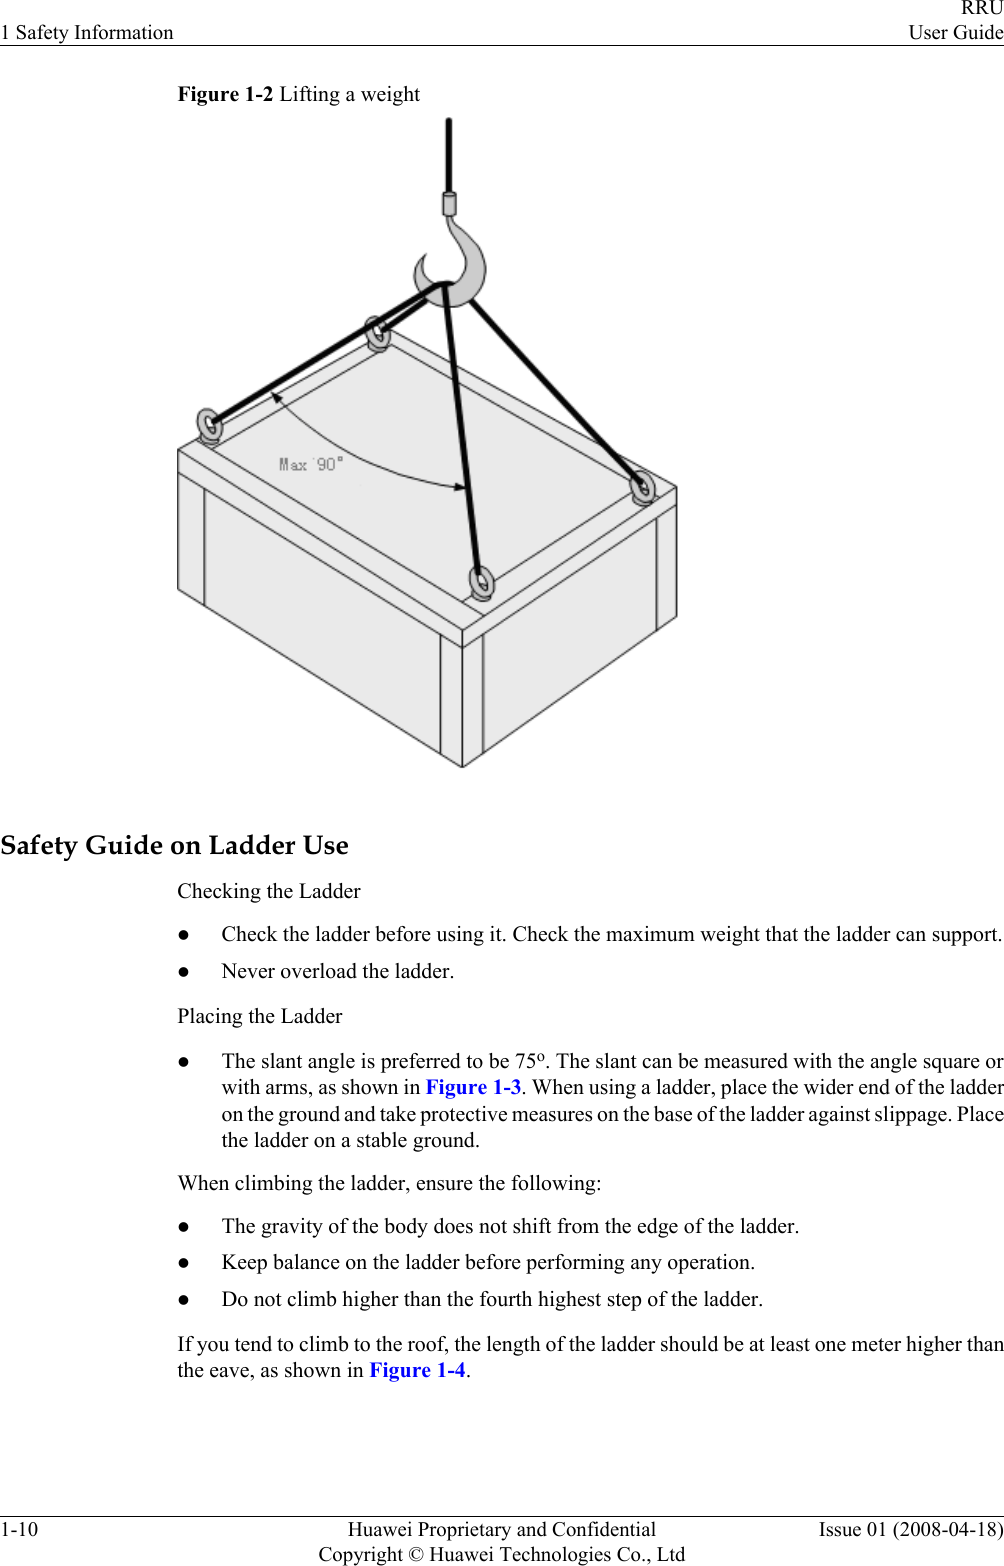 Figure 1-2 Lifting a weightSafety Guide on Ladder UseChecking the LadderlCheck the ladder before using it. Check the maximum weight that the ladder can support.lNever overload the ladder.Placing the LadderlThe slant angle is preferred to be 75o. The slant can be measured with the angle square orwith arms, as shown in Figure 1-3. When using a ladder, place the wider end of the ladderon the ground and take protective measures on the base of the ladder against slippage. Placethe ladder on a stable ground.When climbing the ladder, ensure the following:lThe gravity of the body does not shift from the edge of the ladder.lKeep balance on the ladder before performing any operation.lDo not climb higher than the fourth highest step of the ladder.If you tend to climb to the roof, the length of the ladder should be at least one meter higher thanthe eave, as shown in Figure 1-4.1 Safety InformationRRUUser Guide1-10 Huawei Proprietary and ConfidentialCopyright © Huawei Technologies Co., LtdIssue 01 (2008-04-18)